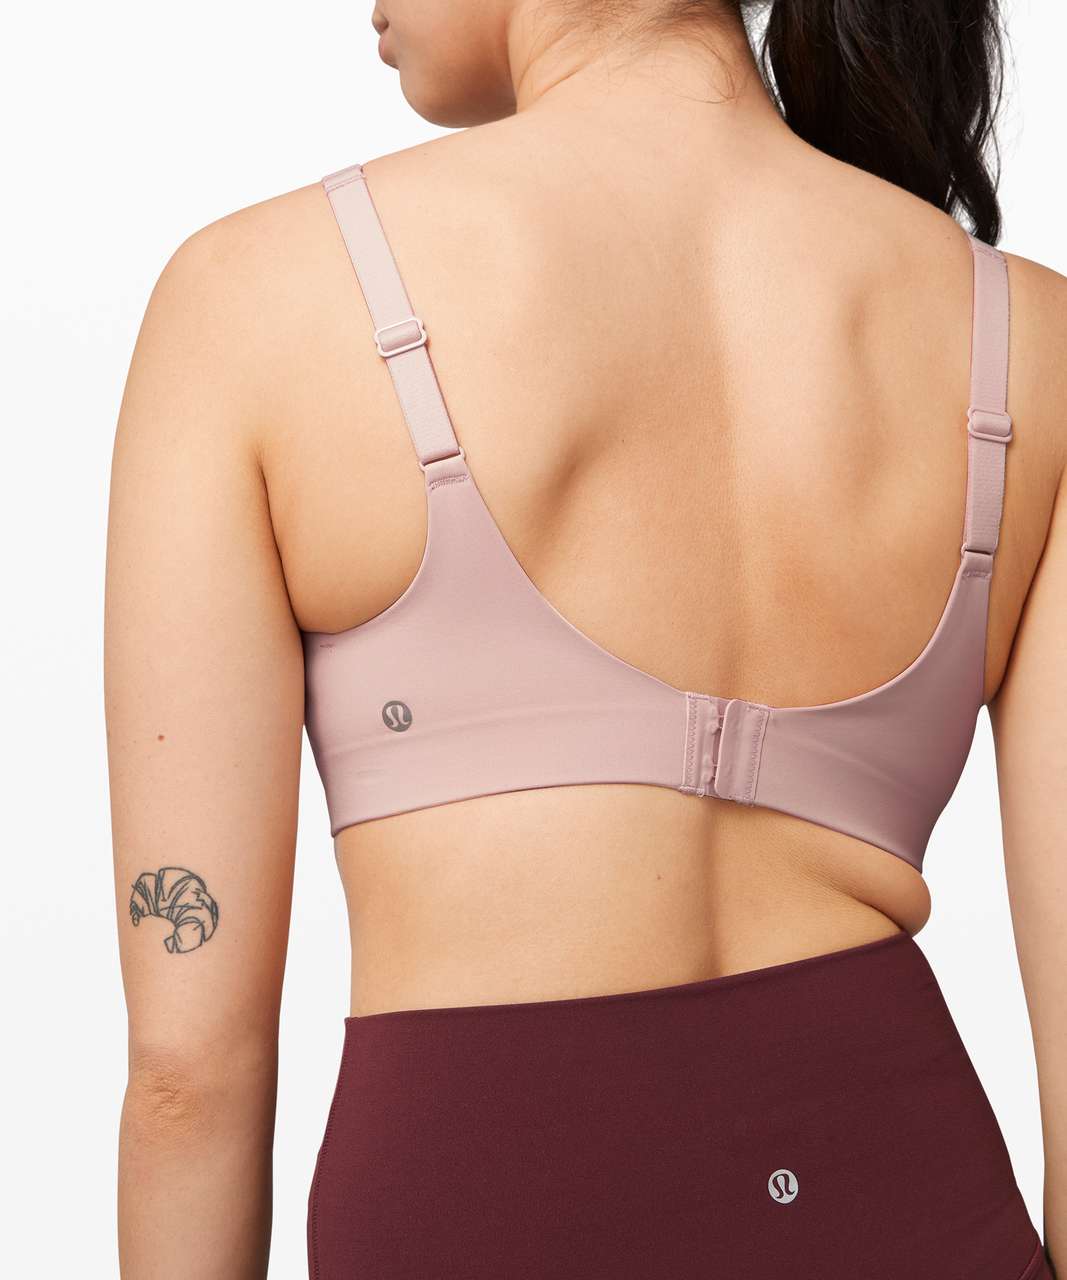 Lululemon Align Bra Reviewed Articles  International Society of Precision  Agriculture